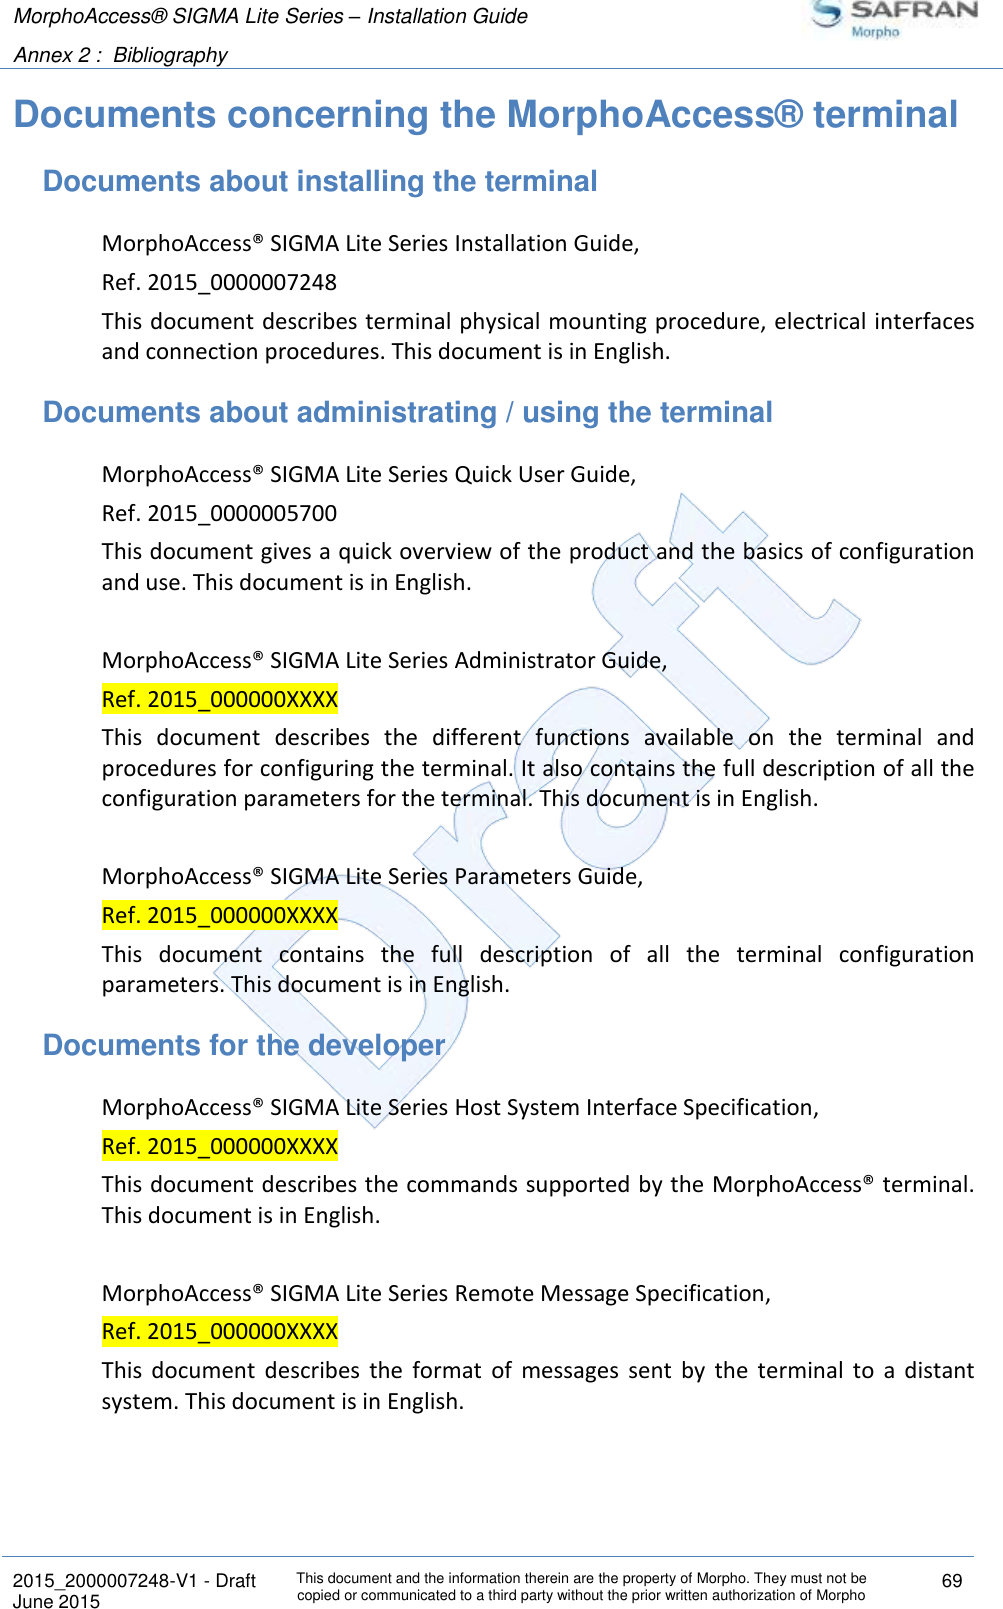 MorphoAccess® SIGMA Lite Series – Installation Guide  Annex 2 :  Bibliography   2015_2000007248-V1 - Draft This document and the information therein are the property of Morpho. They must not be copied or communicated to a third party without the prior written authorization of Morpho 69 June 2015   Documents concerning the MorphoAccess® terminal Documents about installing the terminal MorphoAccess® SIGMA Lite Series Installation Guide, Ref. 2015_0000007248 This document describes terminal physical mounting procedure, electrical interfaces and connection procedures. This document is in English. Documents about administrating / using the terminal MorphoAccess® SIGMA Lite Series Quick User Guide, Ref. 2015_0000005700 This document gives a quick overview of the product and the basics of configuration and use. This document is in English.  MorphoAccess® SIGMA Lite Series Administrator Guide, Ref. 2015_000000XXXX This  document  describes  the  different  functions  available  on  the  terminal  and procedures for configuring the terminal. It also contains the full description of all the configuration parameters for the terminal. This document is in English.  MorphoAccess® SIGMA Lite Series Parameters Guide, Ref. 2015_000000XXXX This  document  contains  the  full  description  of  all  the  terminal  configuration parameters. This document is in English. Documents for the developer MorphoAccess® SIGMA Lite Series Host System Interface Specification, Ref. 2015_000000XXXX This document describes the commands supported by the MorphoAccess® terminal. This document is in English.  MorphoAccess® SIGMA Lite Series Remote Message Specification, Ref. 2015_000000XXXX This  document  describes  the  format  of  messages  sent  by  the  terminal  to  a  distant system. This document is in English. 